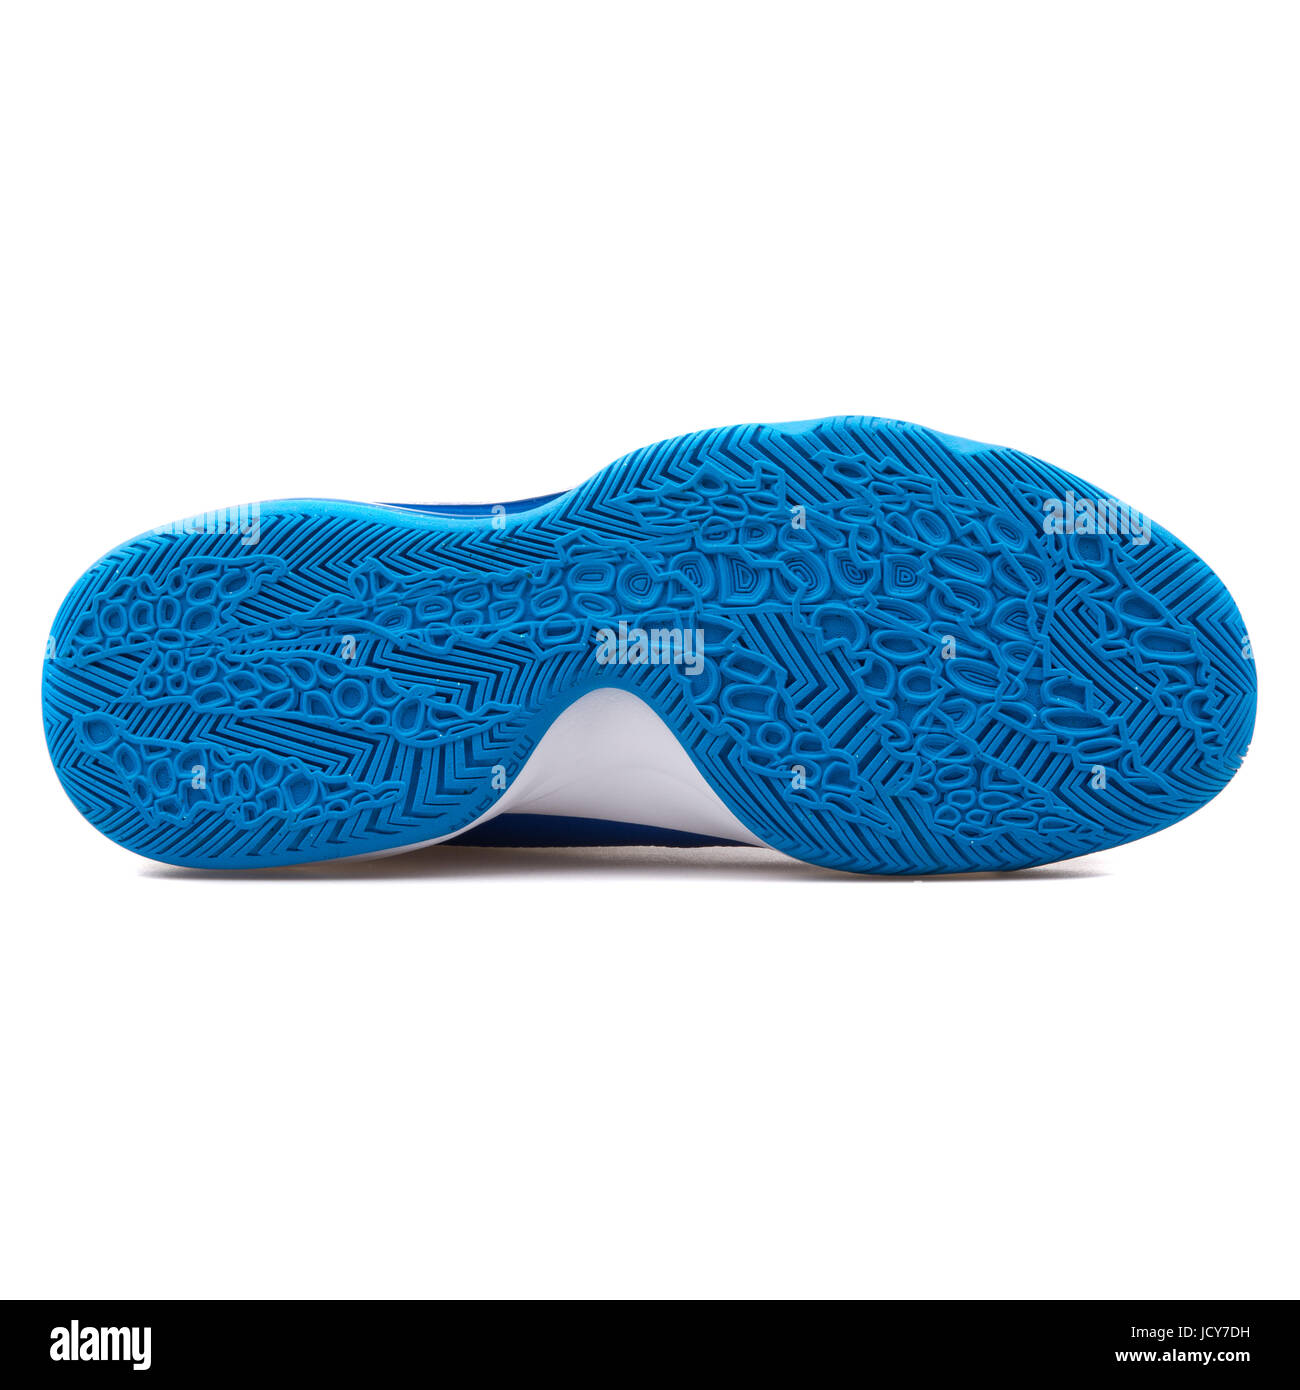 Nike Air Max Audacity TB Blue and White Unisex Basketball Shoes -  749166-403 Stock Photo - Alamy